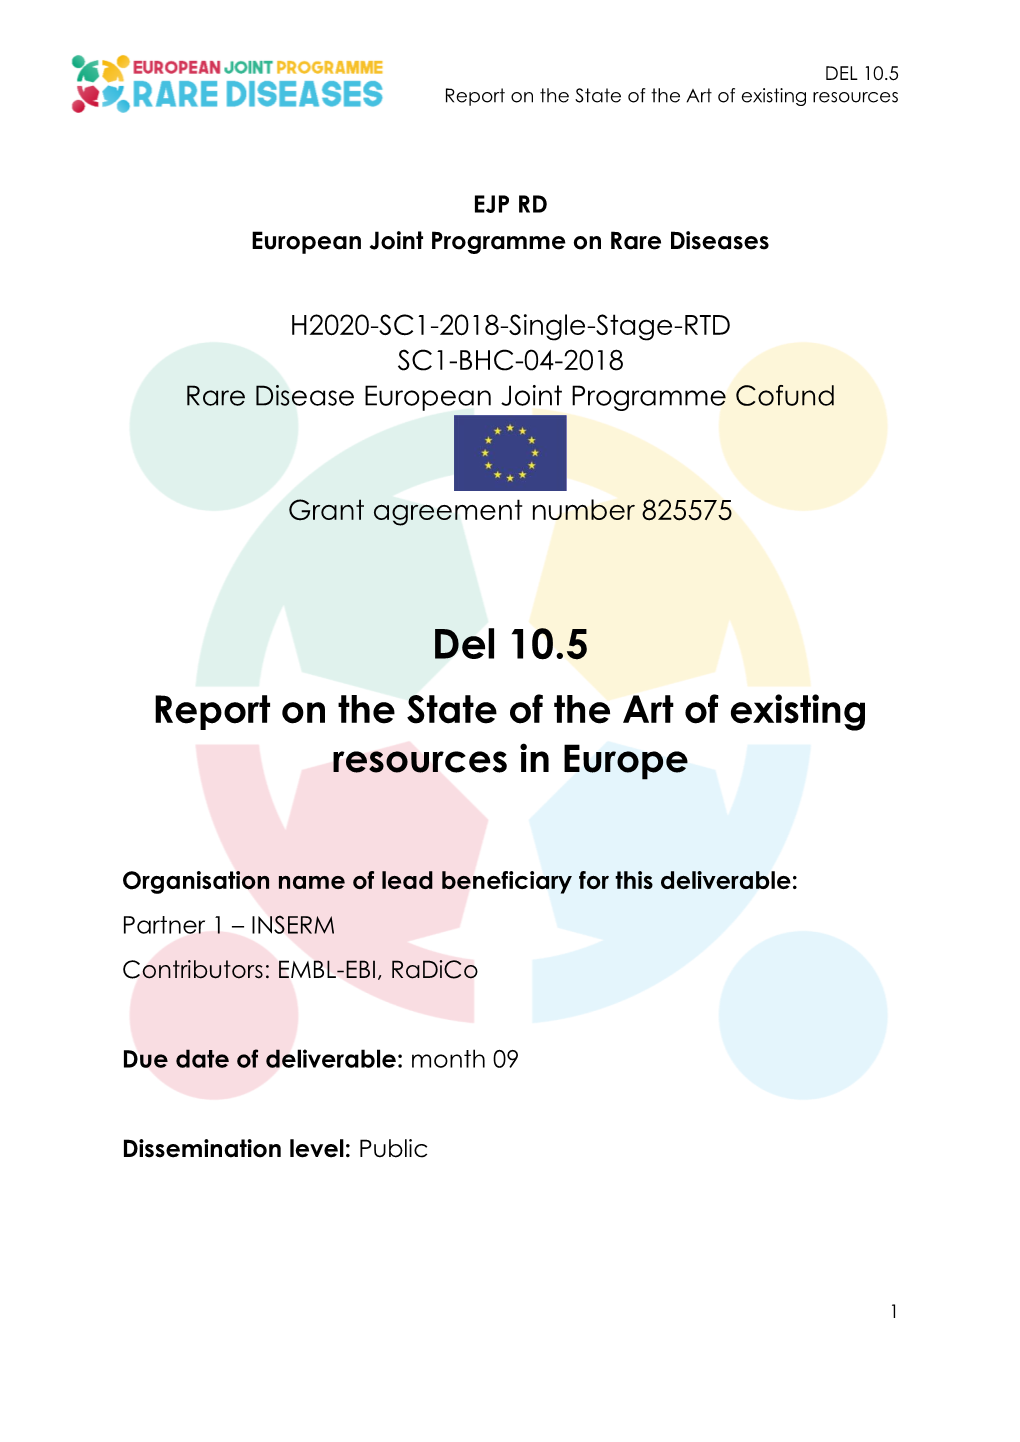 D10.5 Report on the State of the Art of Existing Resources in Europe